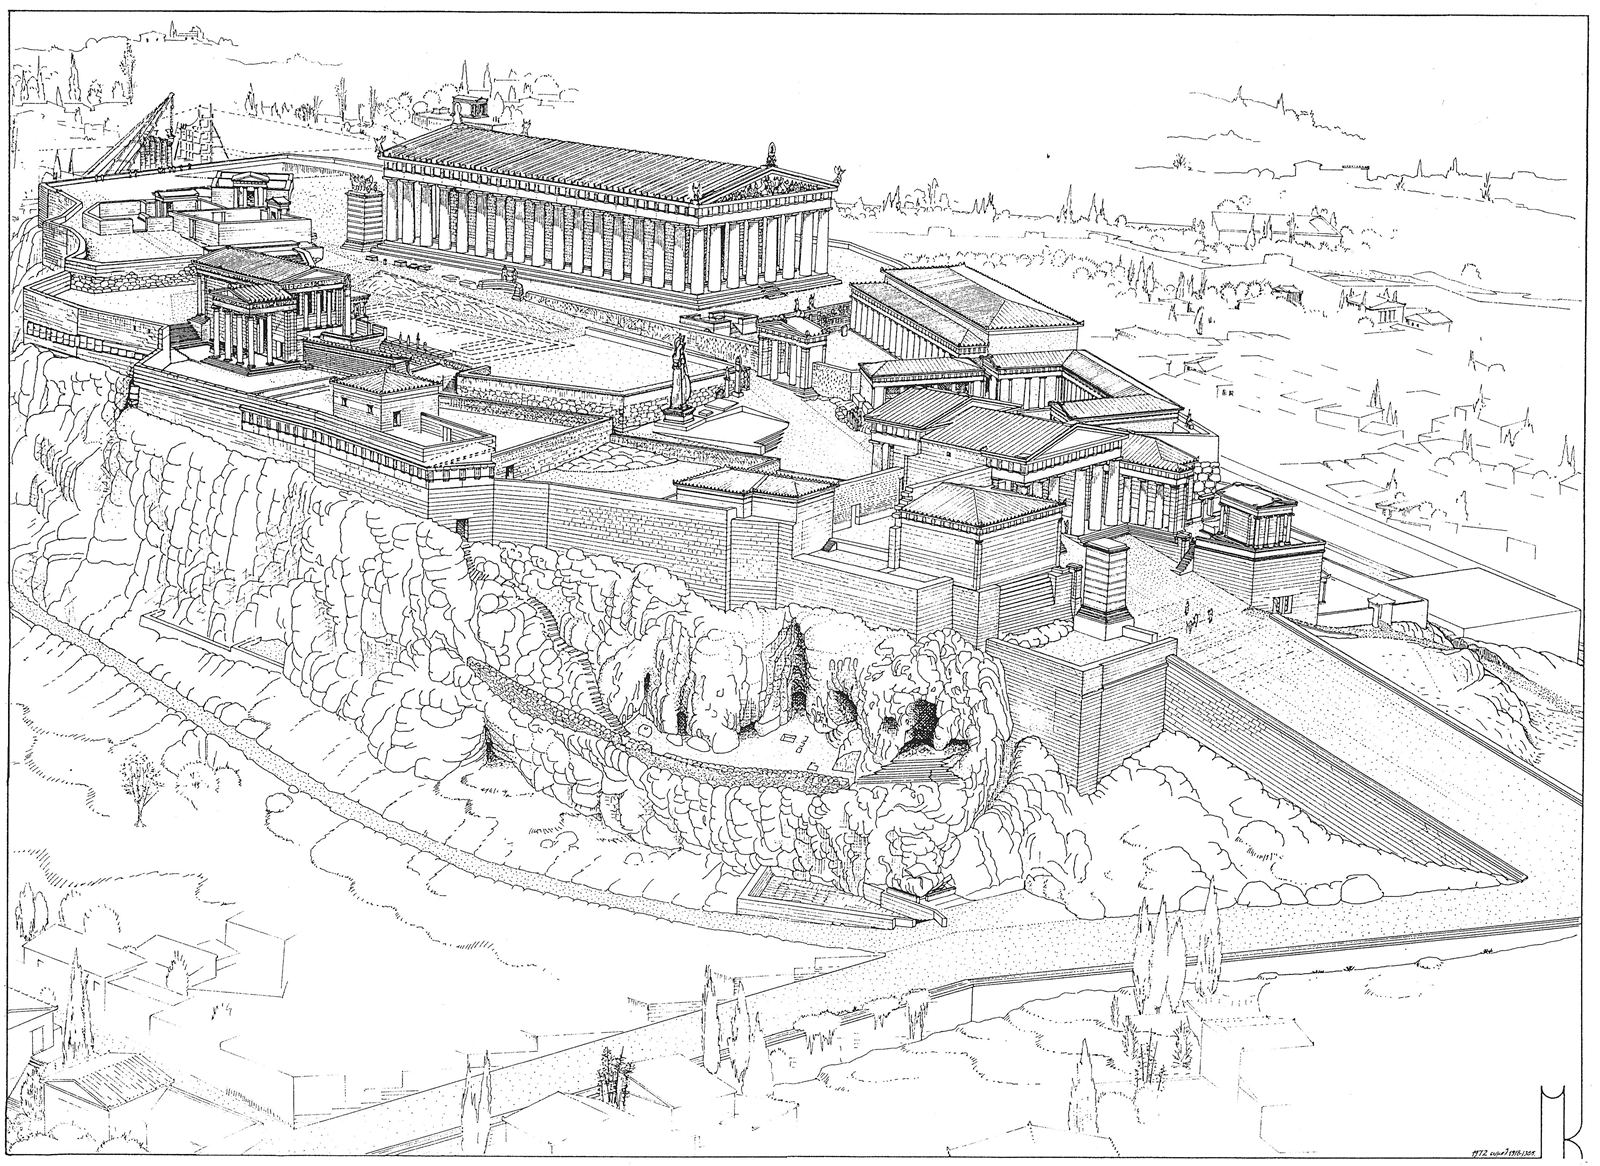 Drawing - Reconstruction of the Acropolis ramp (circa 500 BCE) by Manolis Korres.